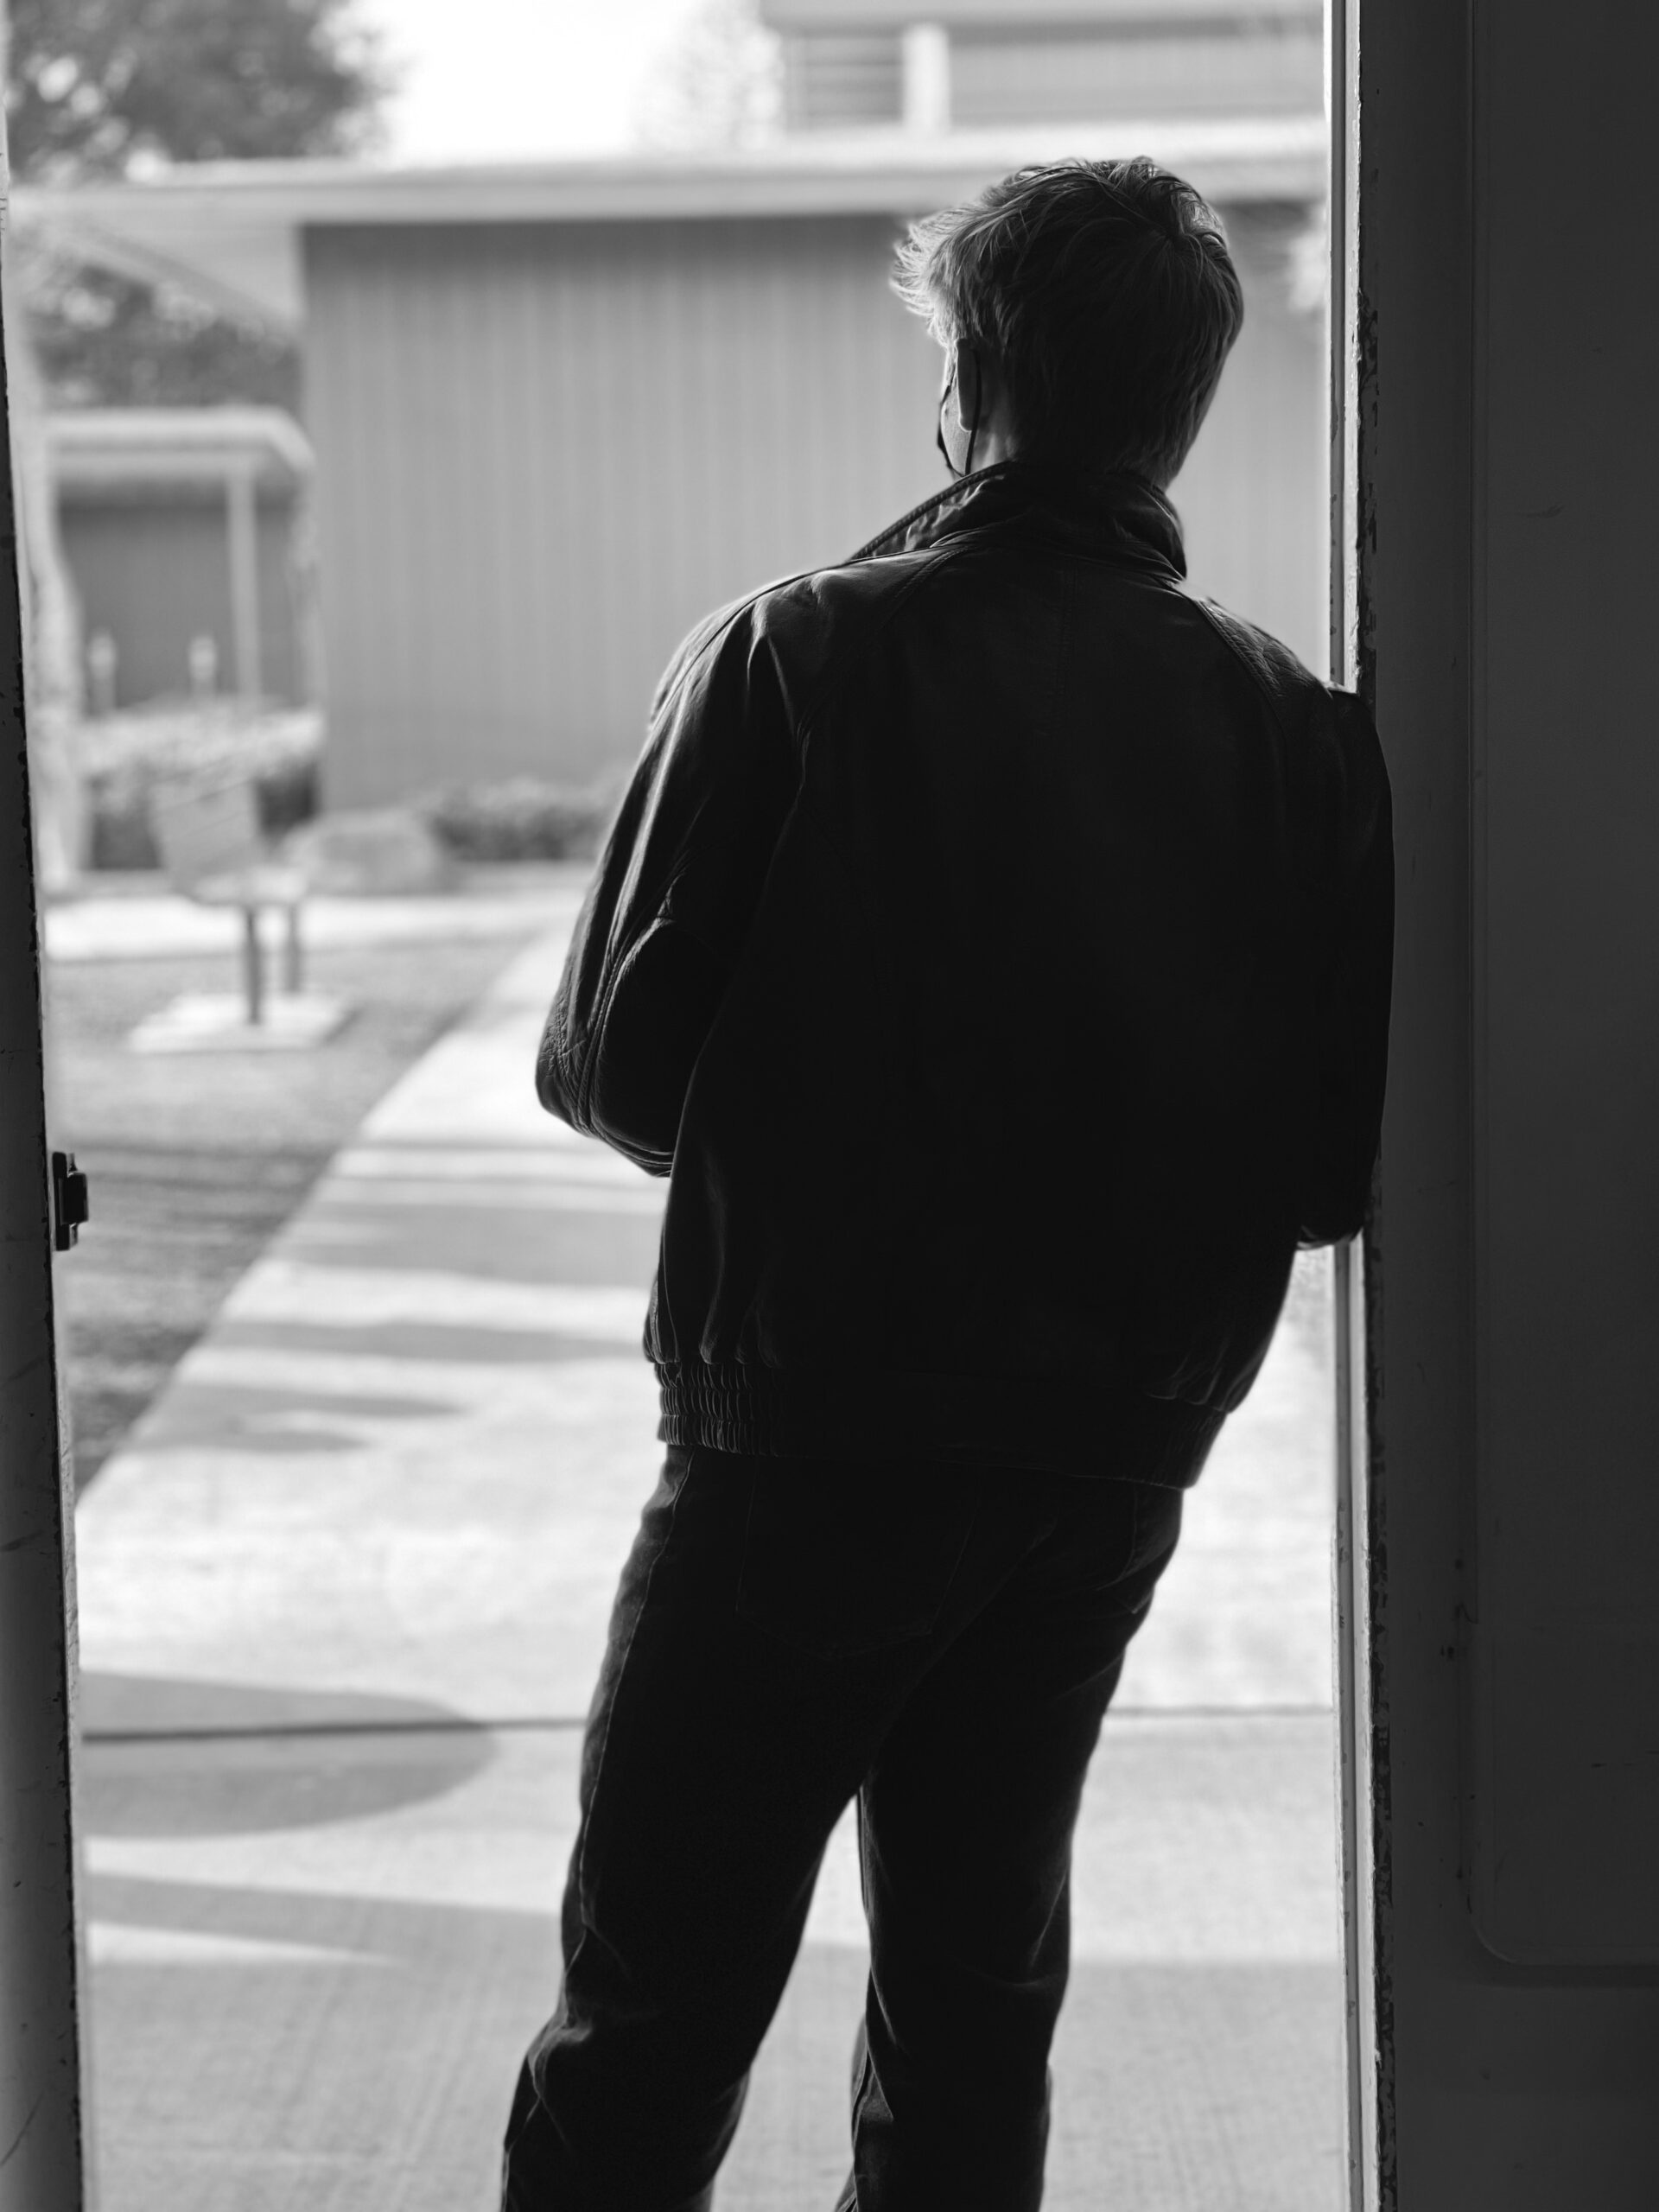 A greaser looking out the window a doorway. 